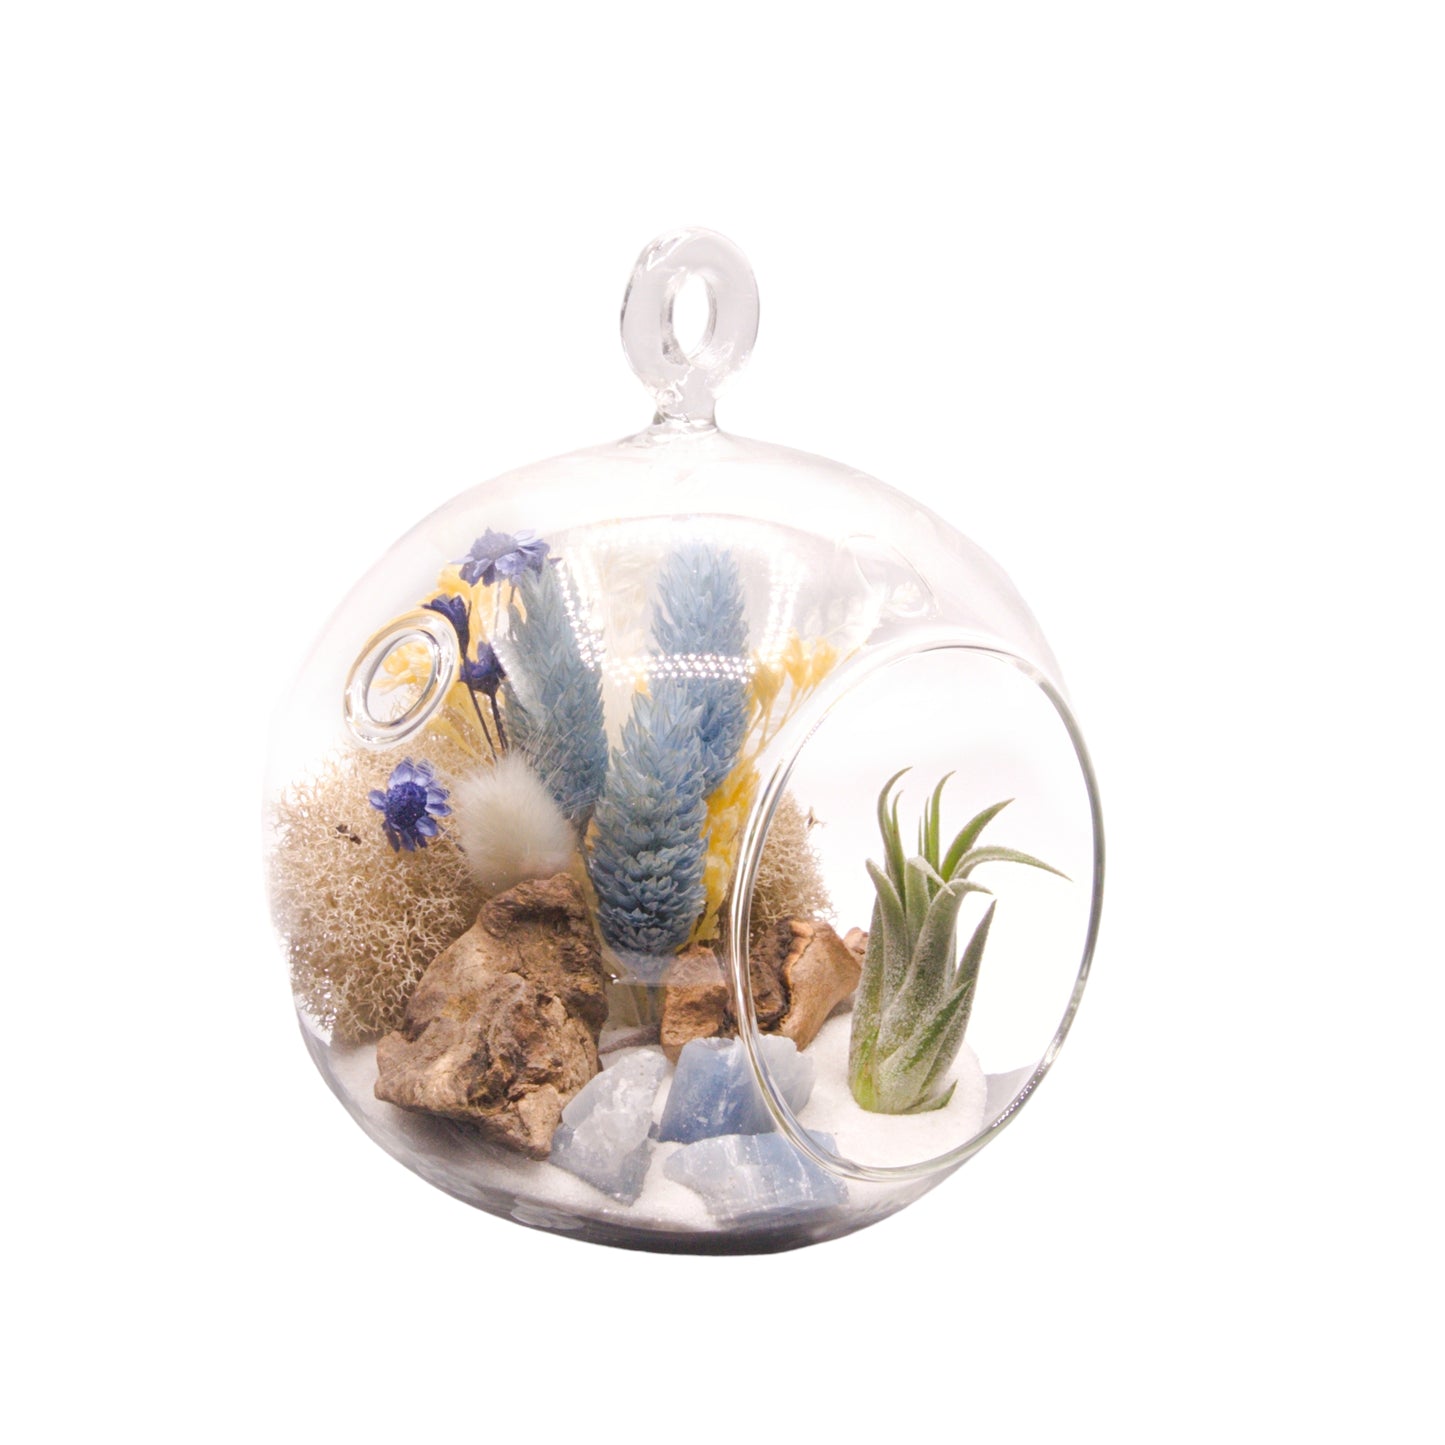 Glass bubble terrarium with airplant, dried flowers and blue calcite crystals